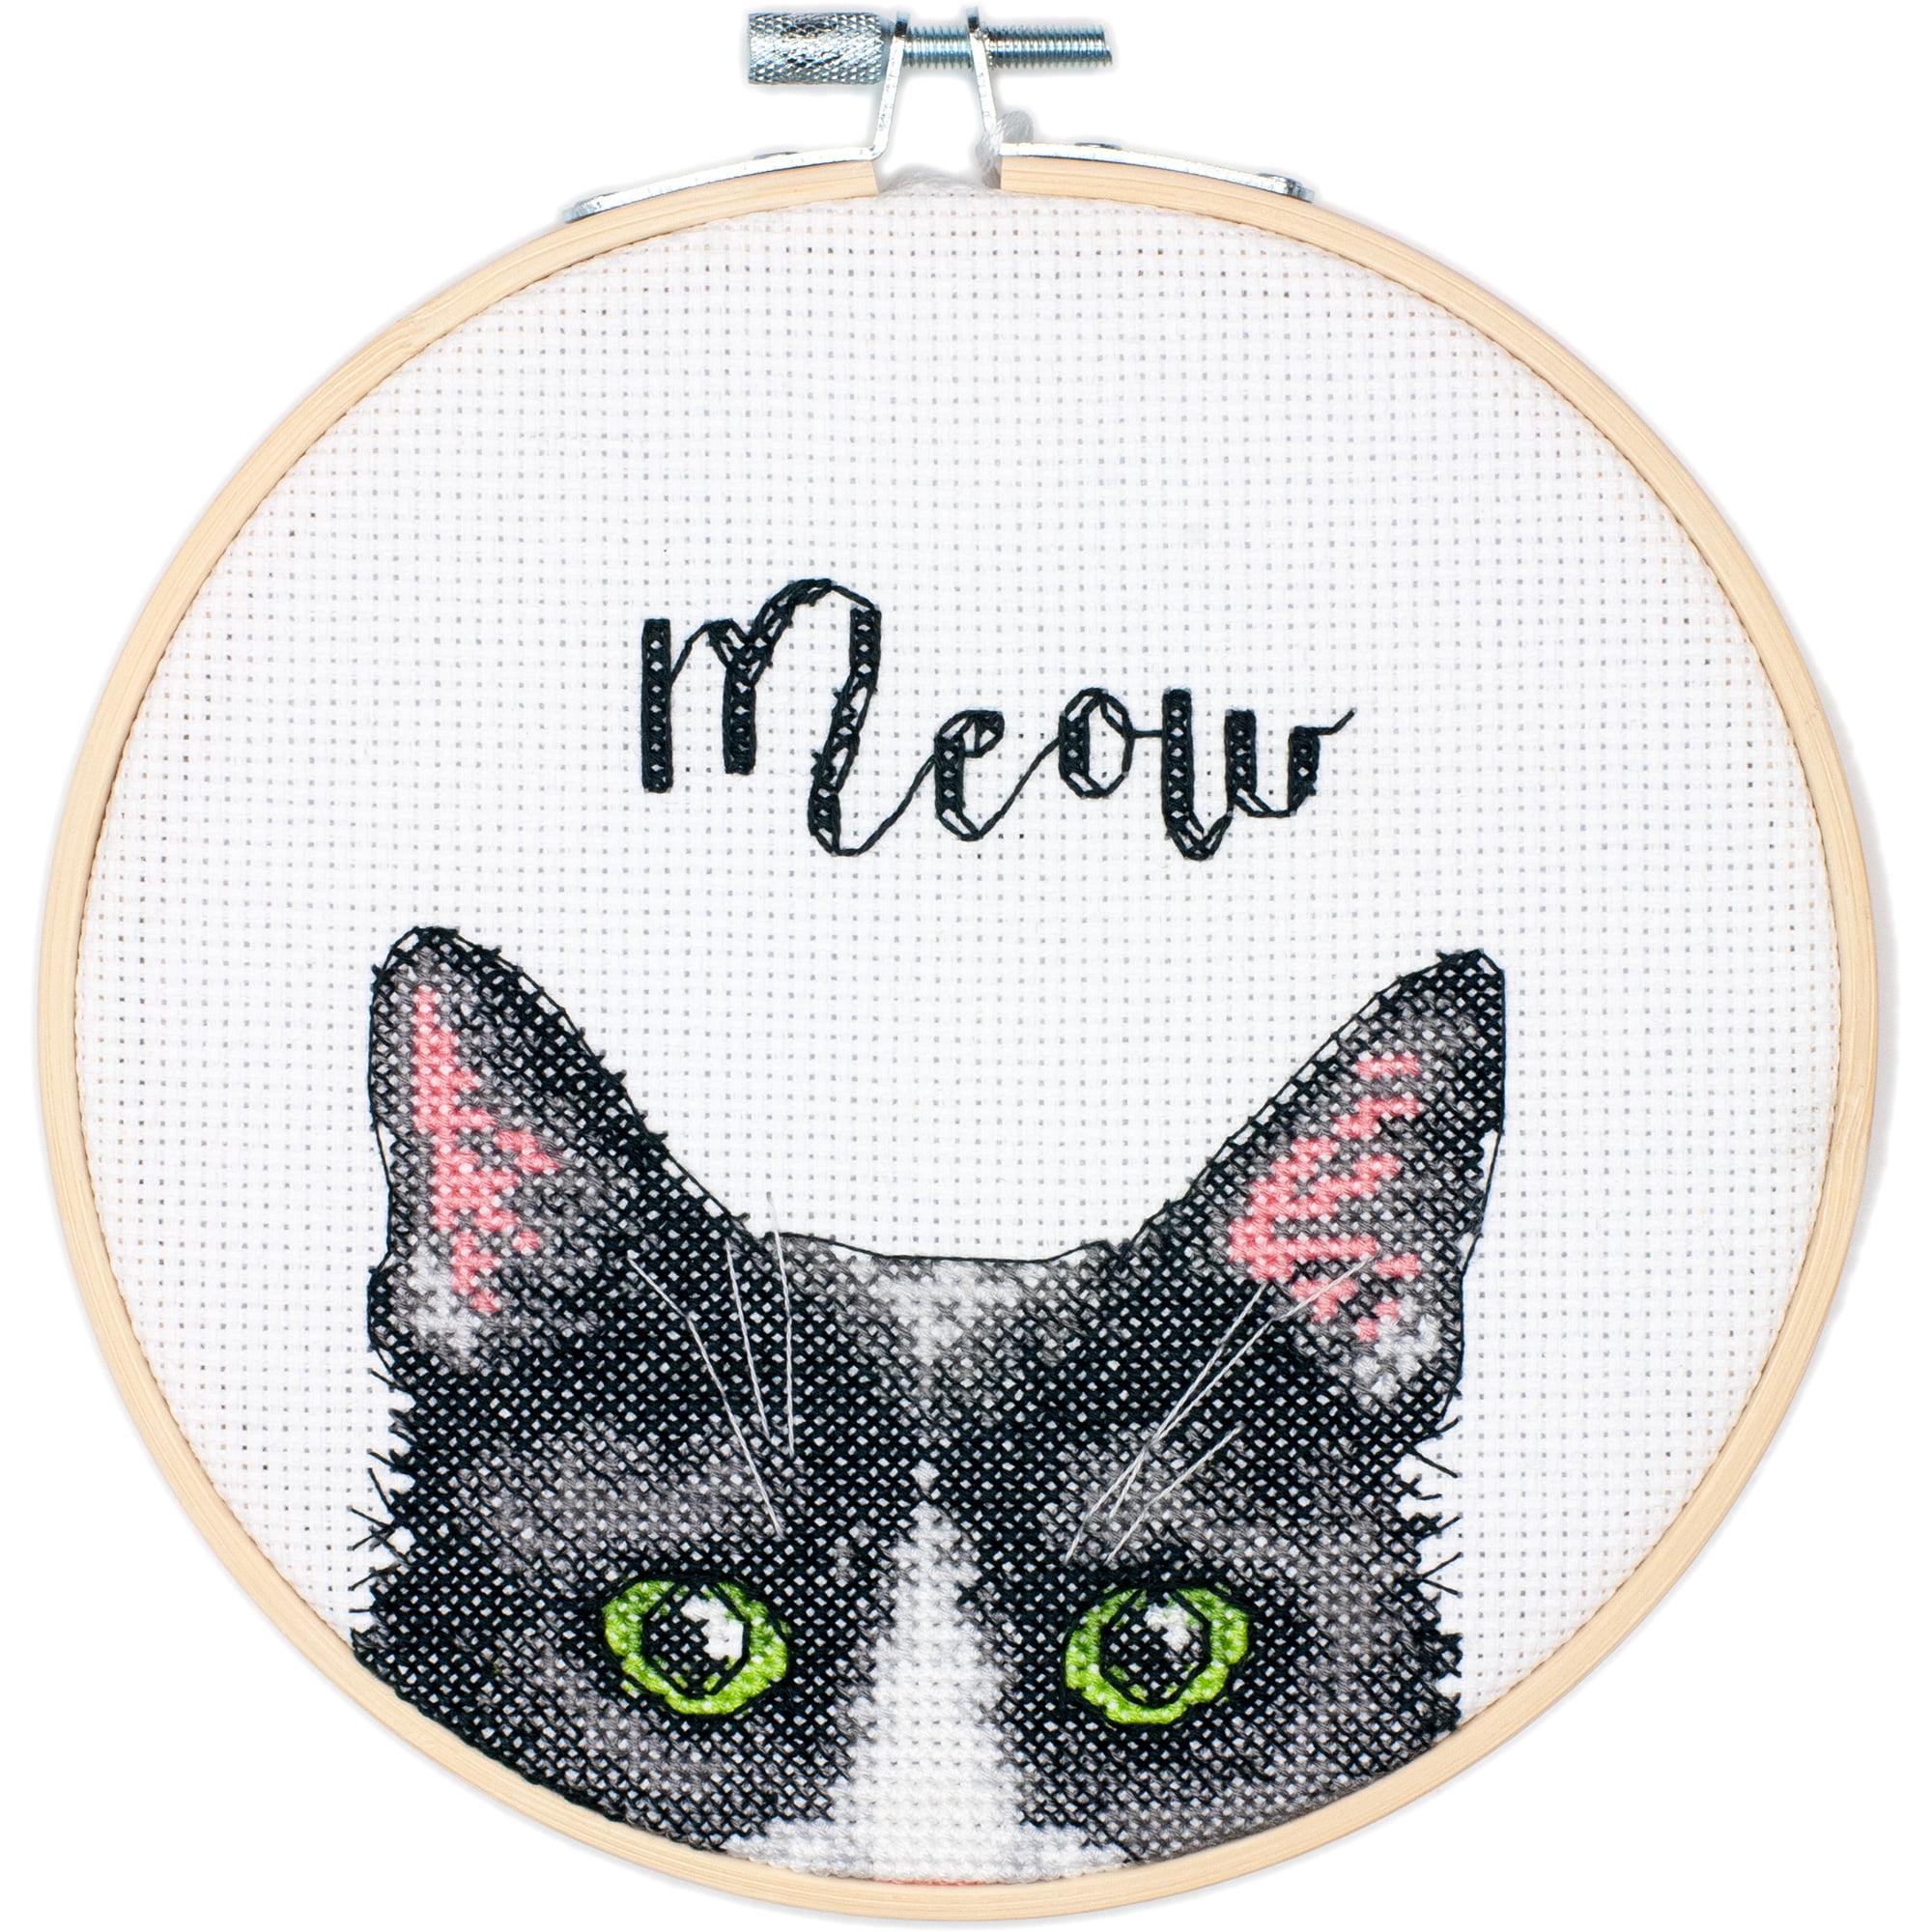 Simplicity Meow Counted Cross Stitch Kit, Size: 6 inch